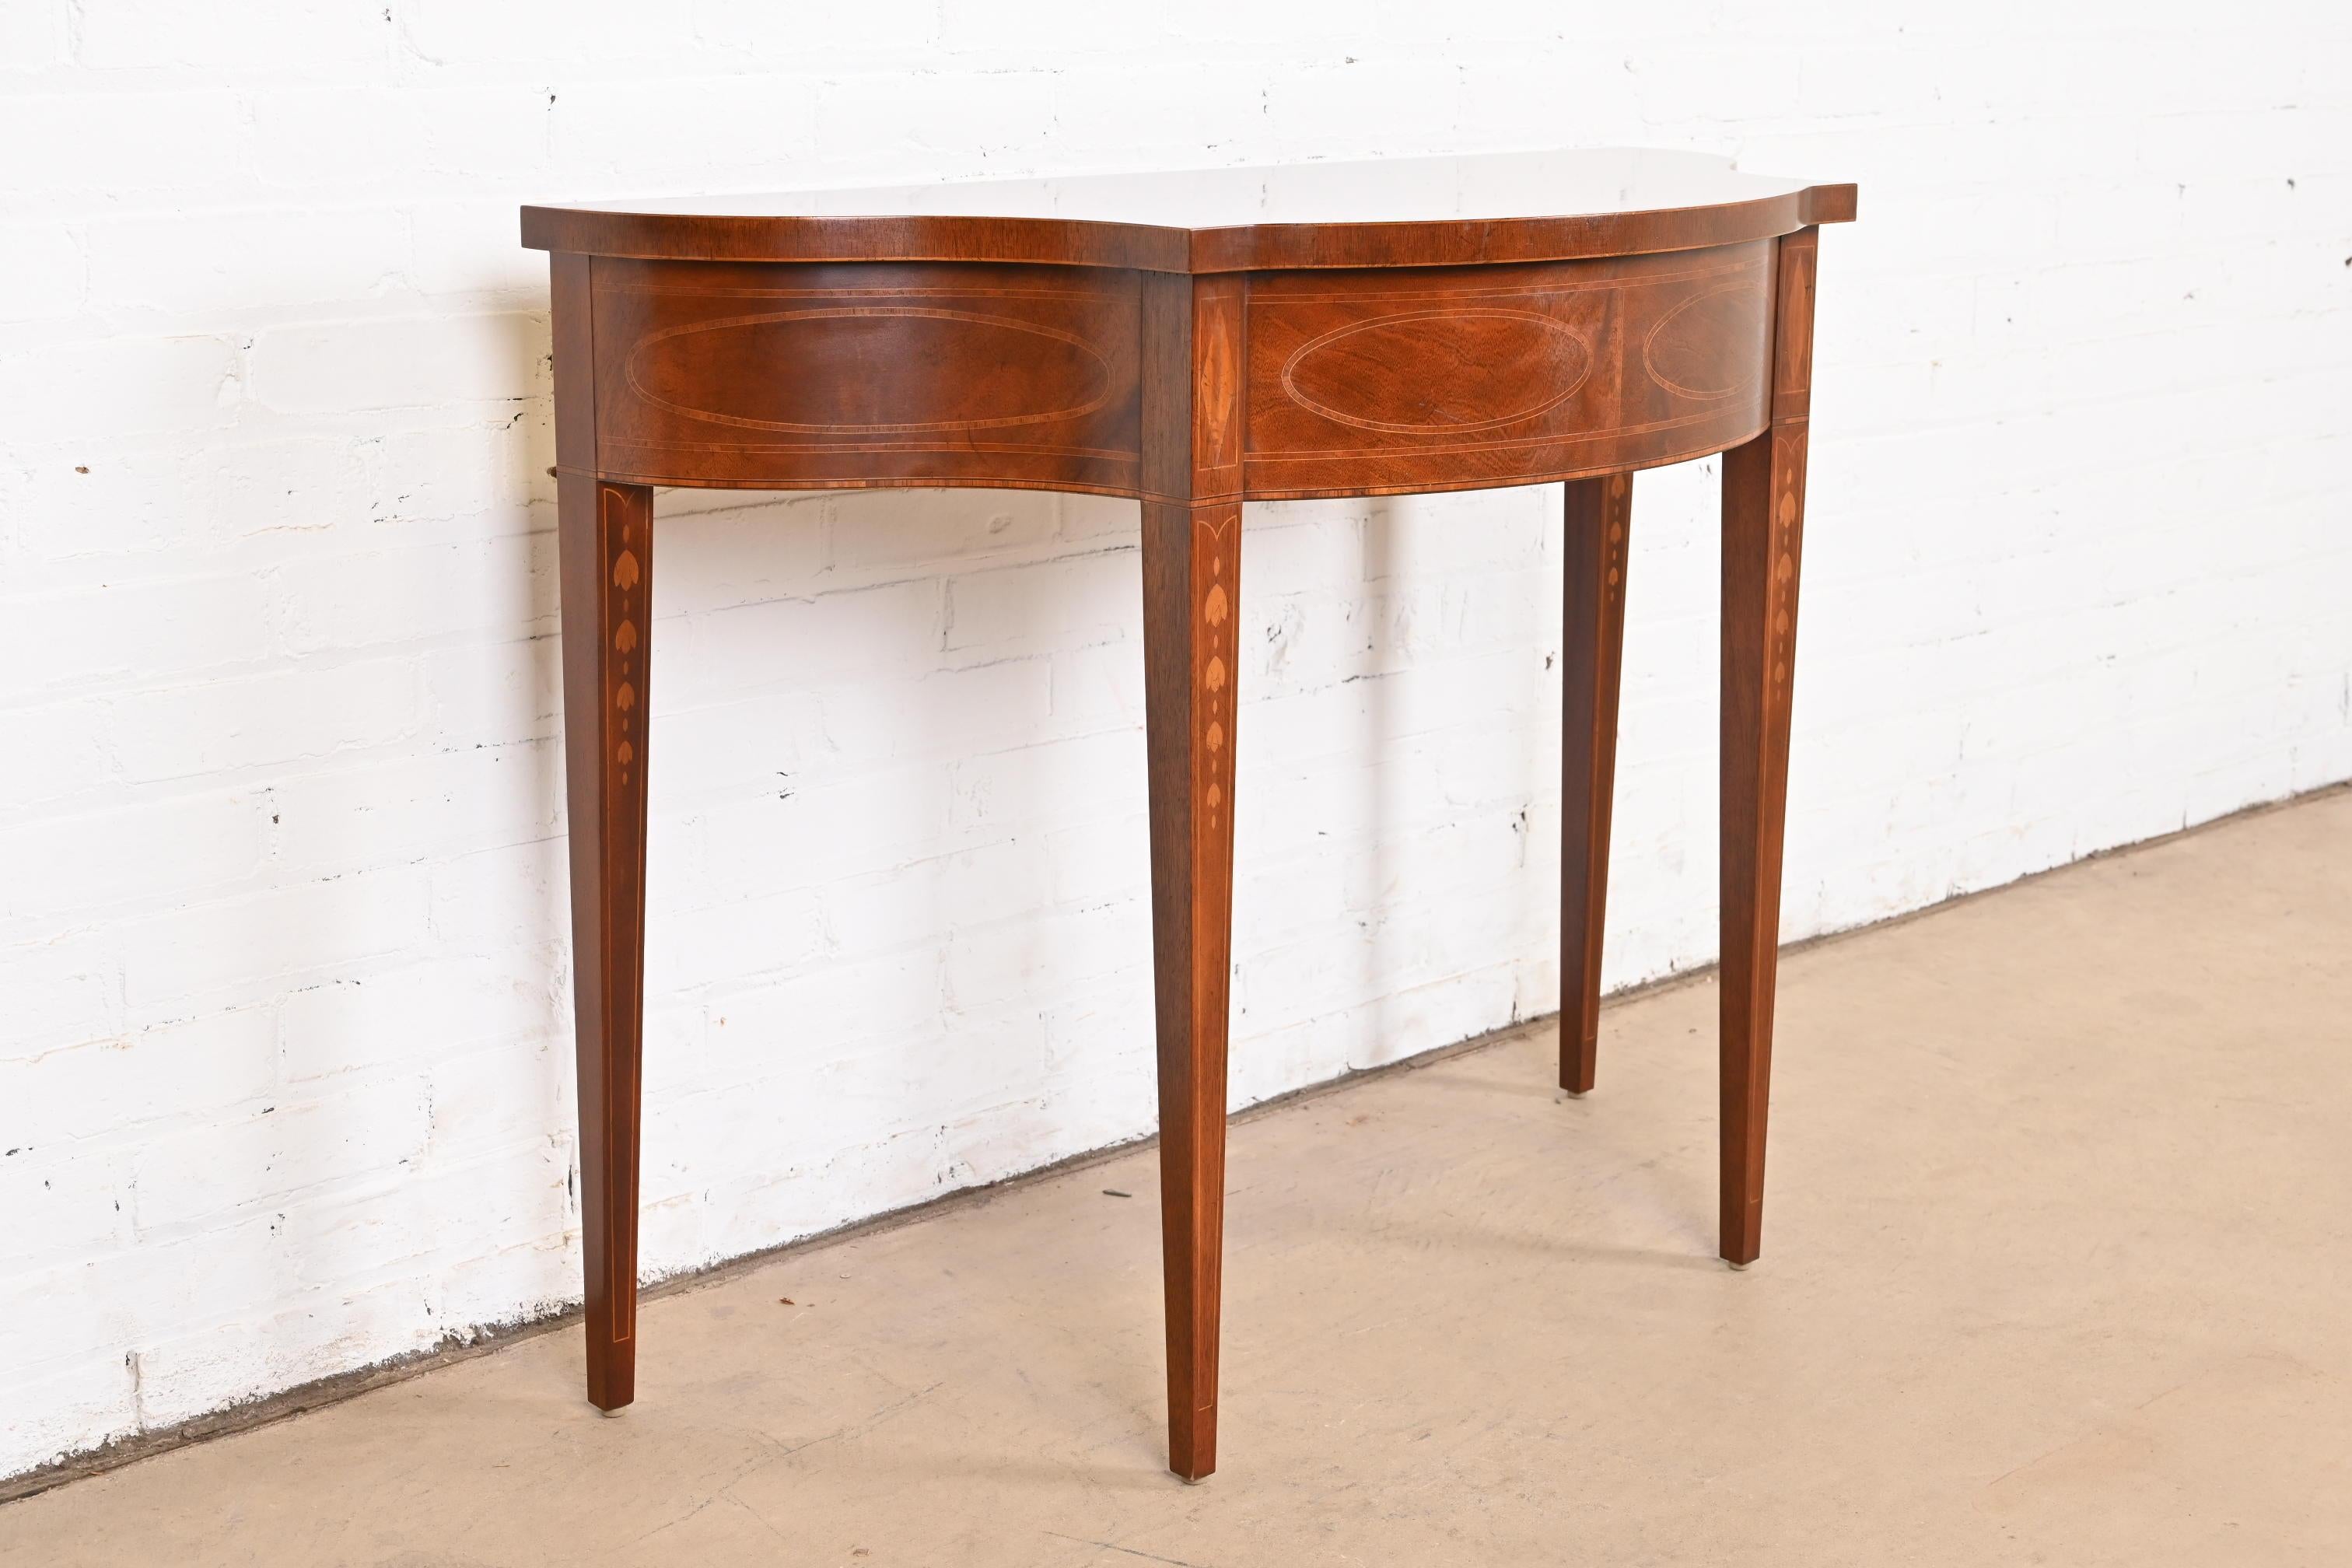 Baker Furniture Historic Charleston Federal Mahogany Console or Entry Table 1